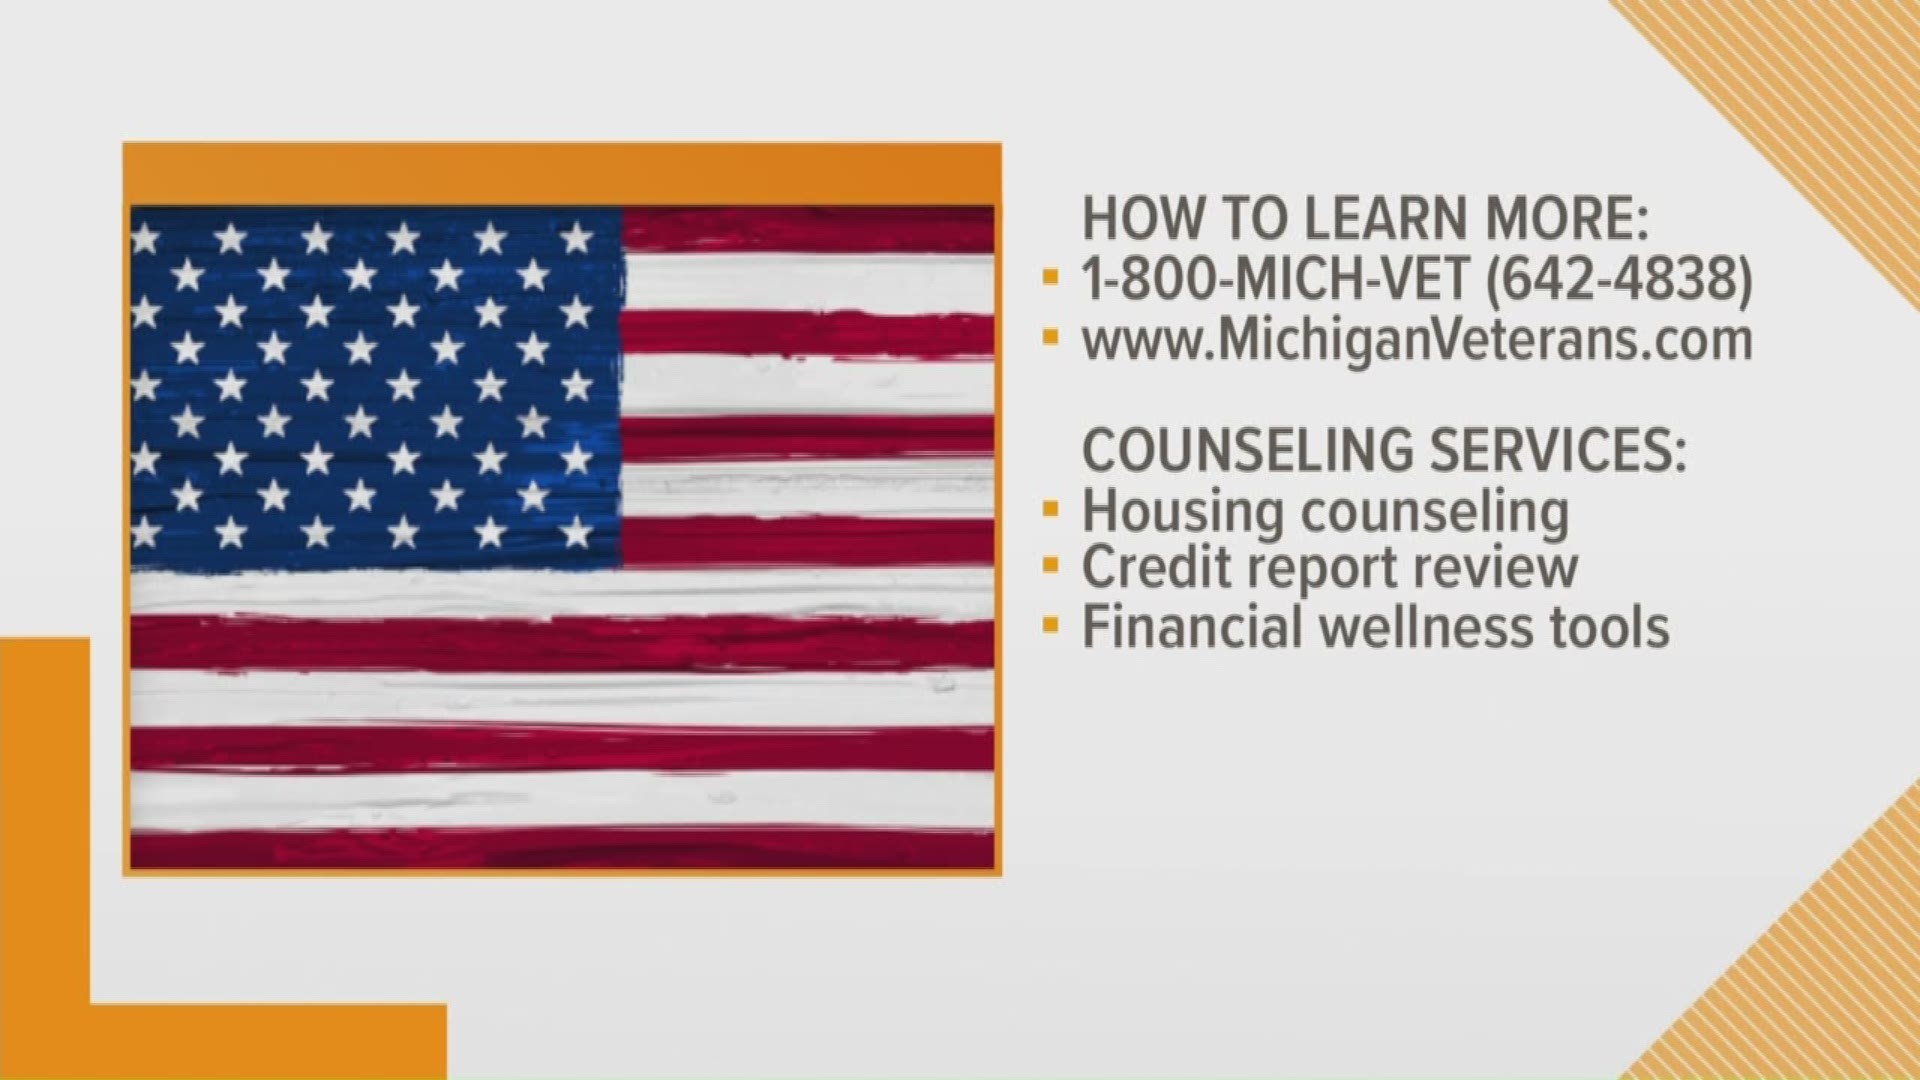 The Michigan Veterans Affairs Agency announced Monday that veterans and their families have access to free financial counseling through a state pilot program. The program can help veterans who are struggling to manage their finances or overcome crippling debt.